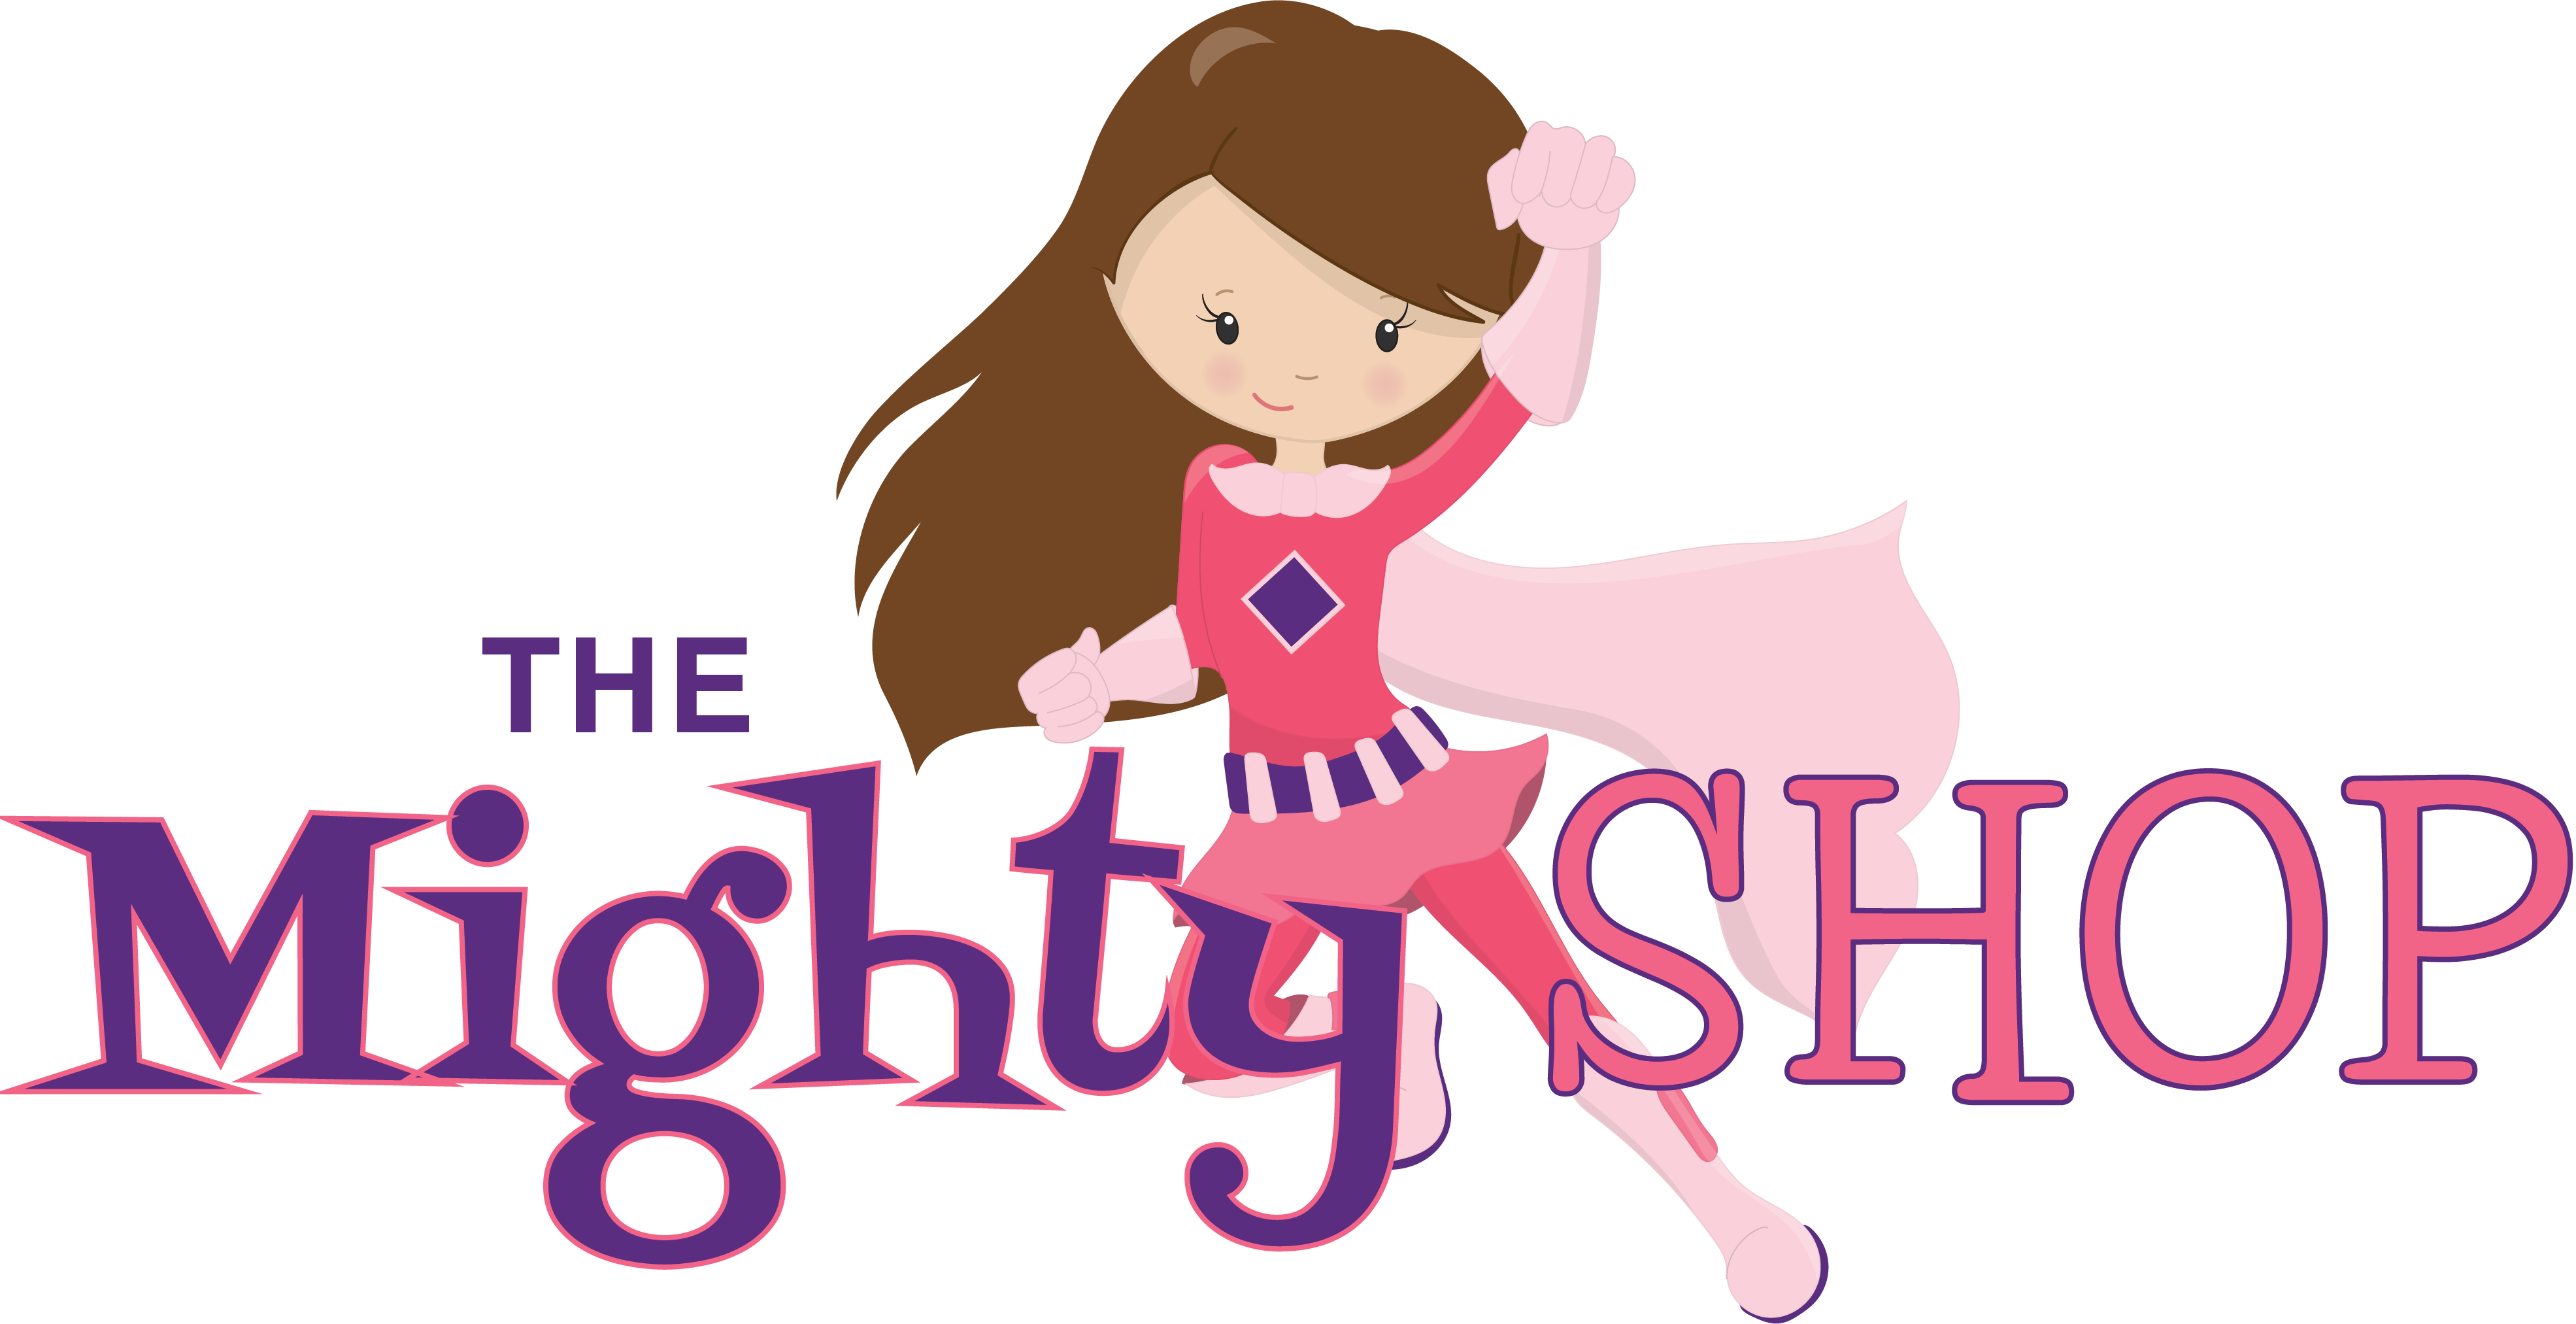 Mighty Shop by Techie Mamma